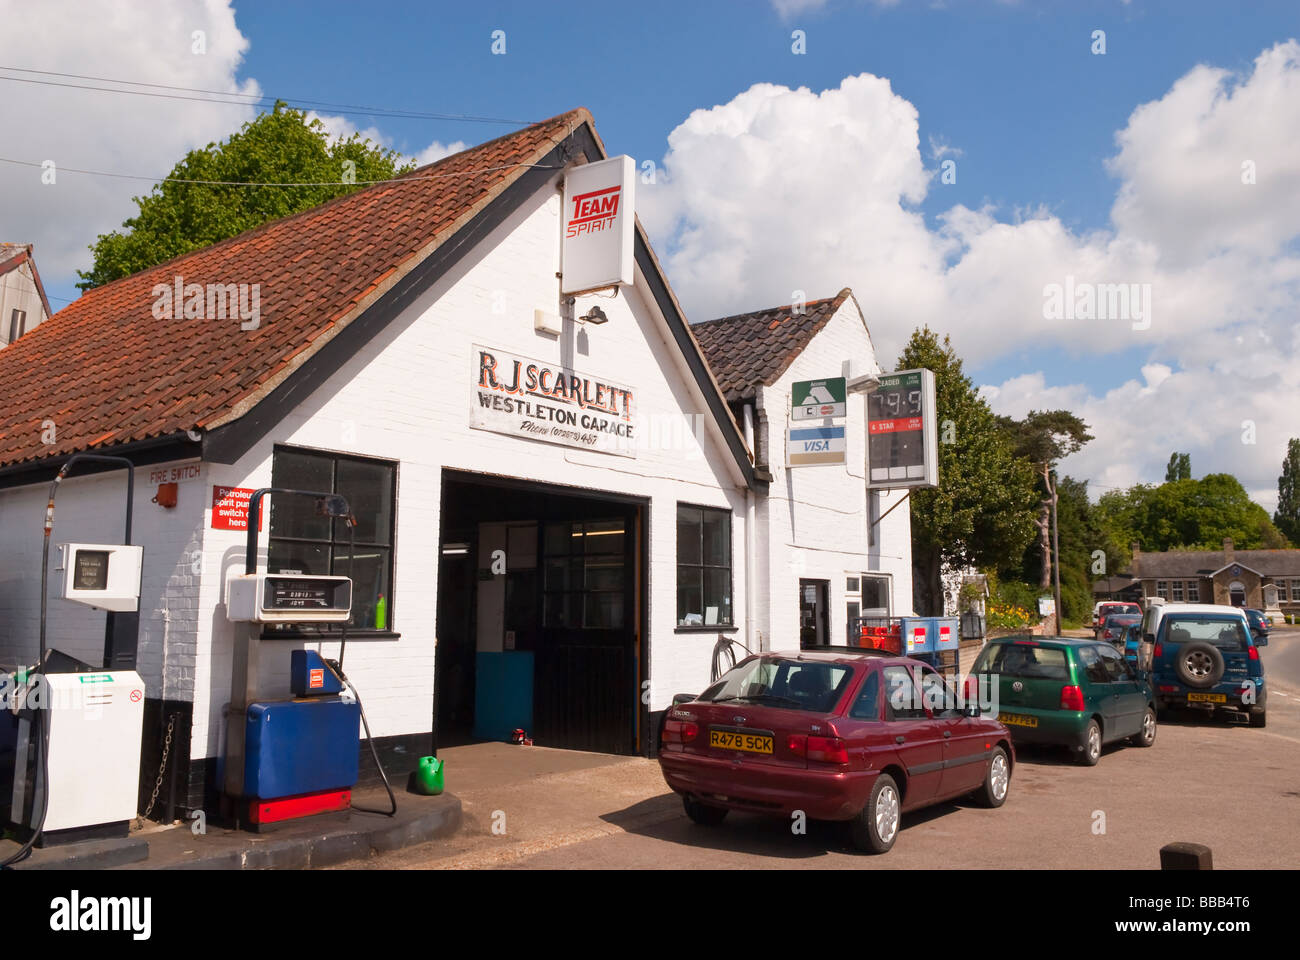 R.J.Scarlett the westleton garage and service station in the small village of Westleton,Suffolk,Uk Stock Photo